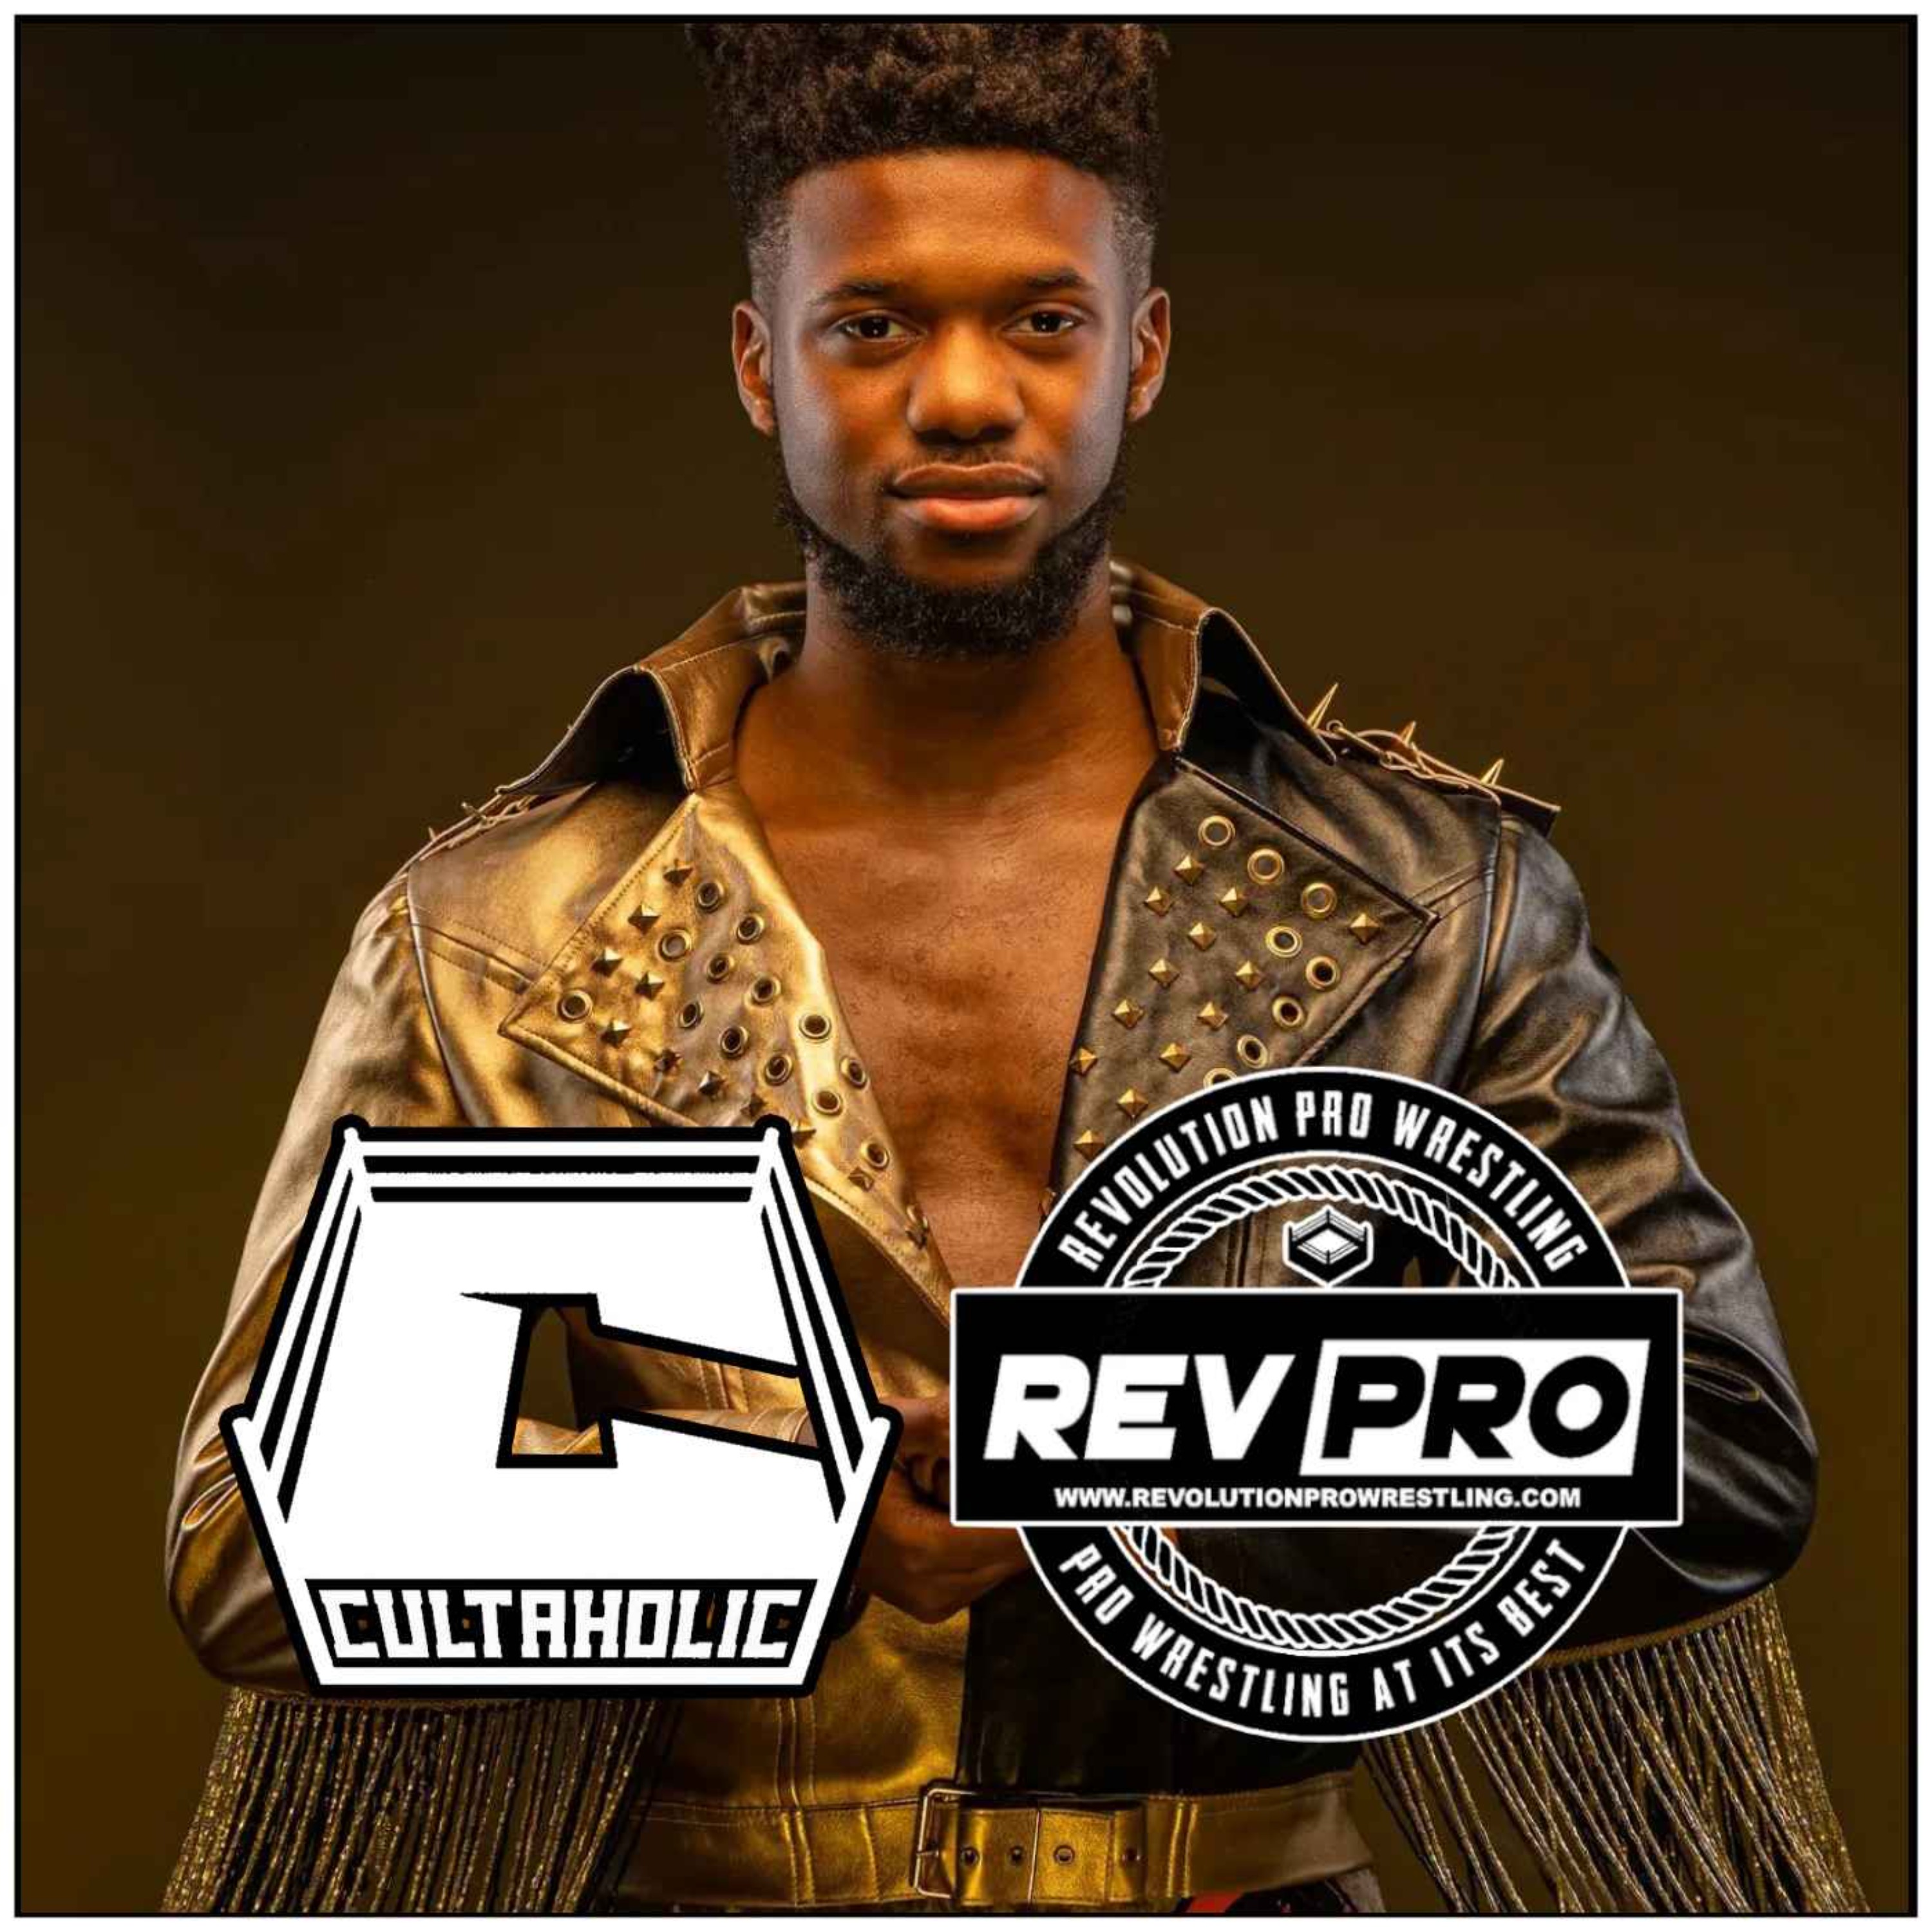 REVPRO Champion MICHAEL OKU on RevPro's 11th Anniversary show before AEW All In, Chris Jericho advice and an AJ Styles Dream Match | CULTAHOLIC EXCLUSIVE INTERVIEW